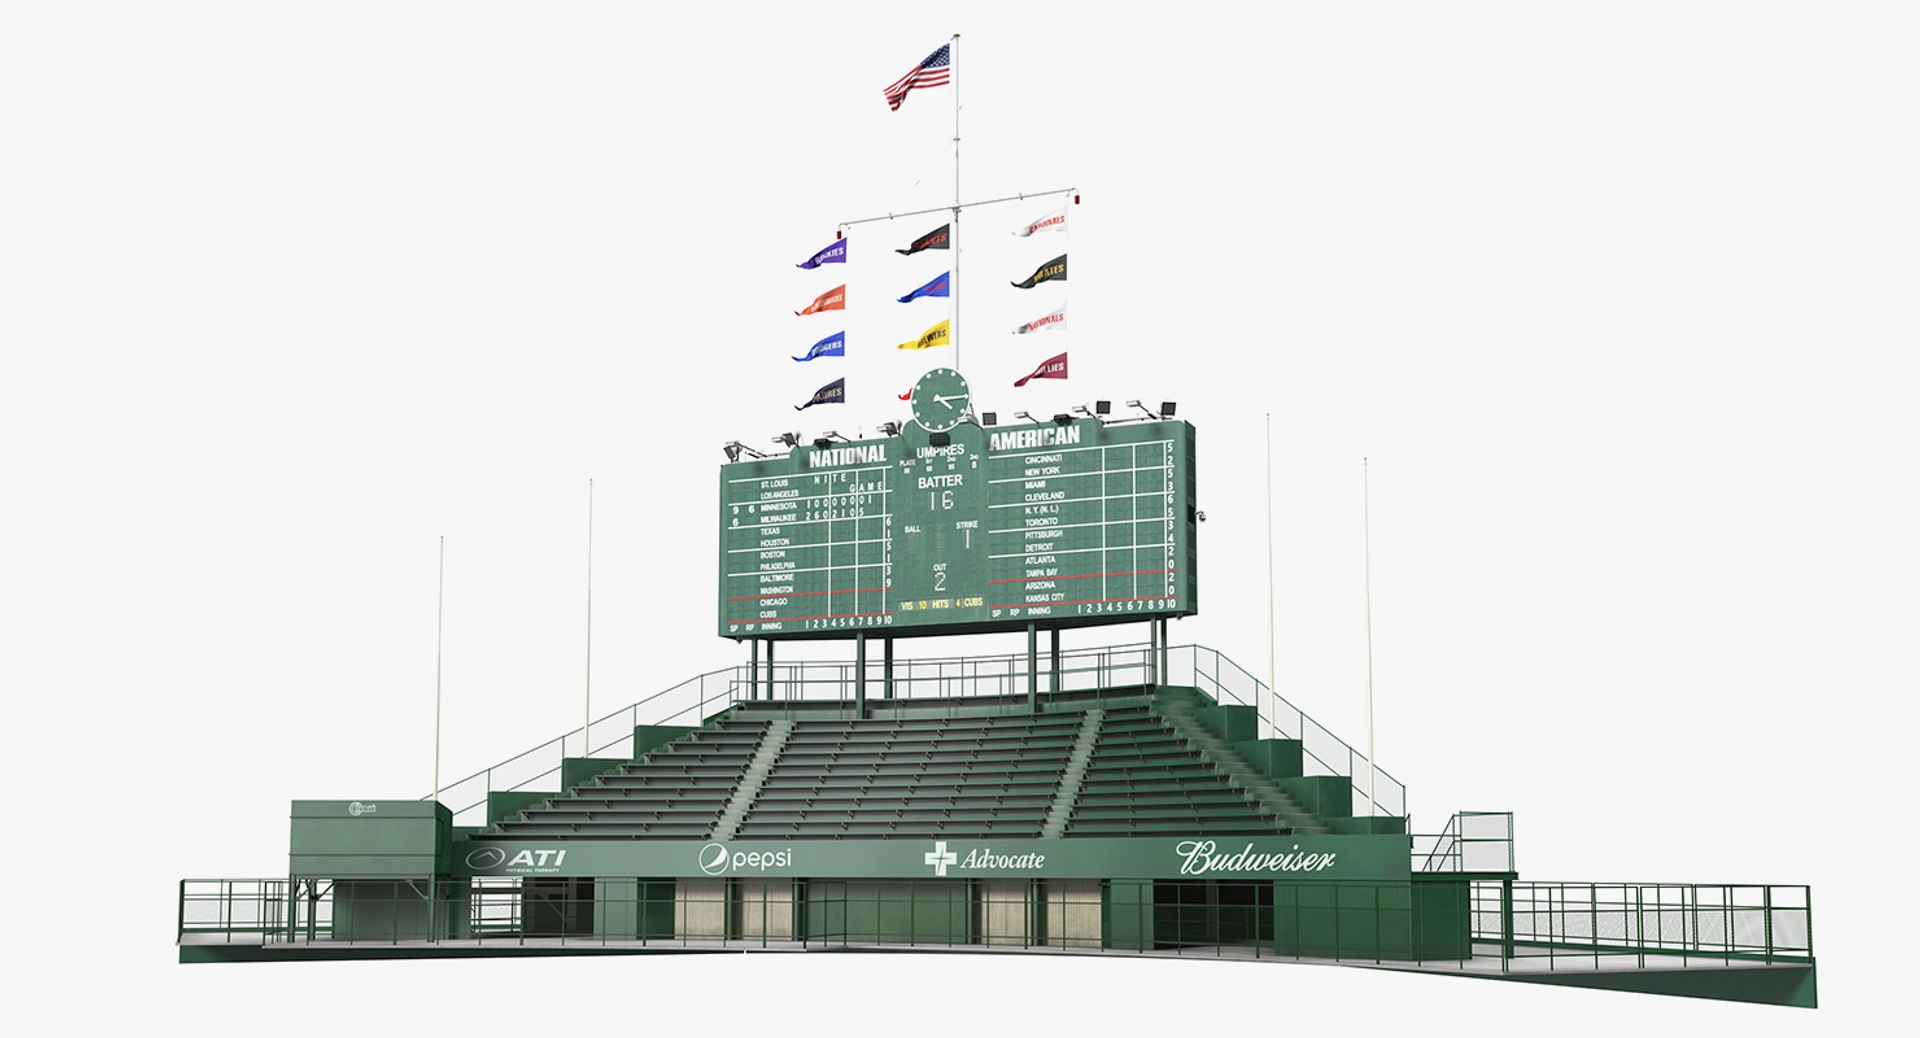 Wrigley Field Scoreboard, Wrigley Field Scoreboard. These p…